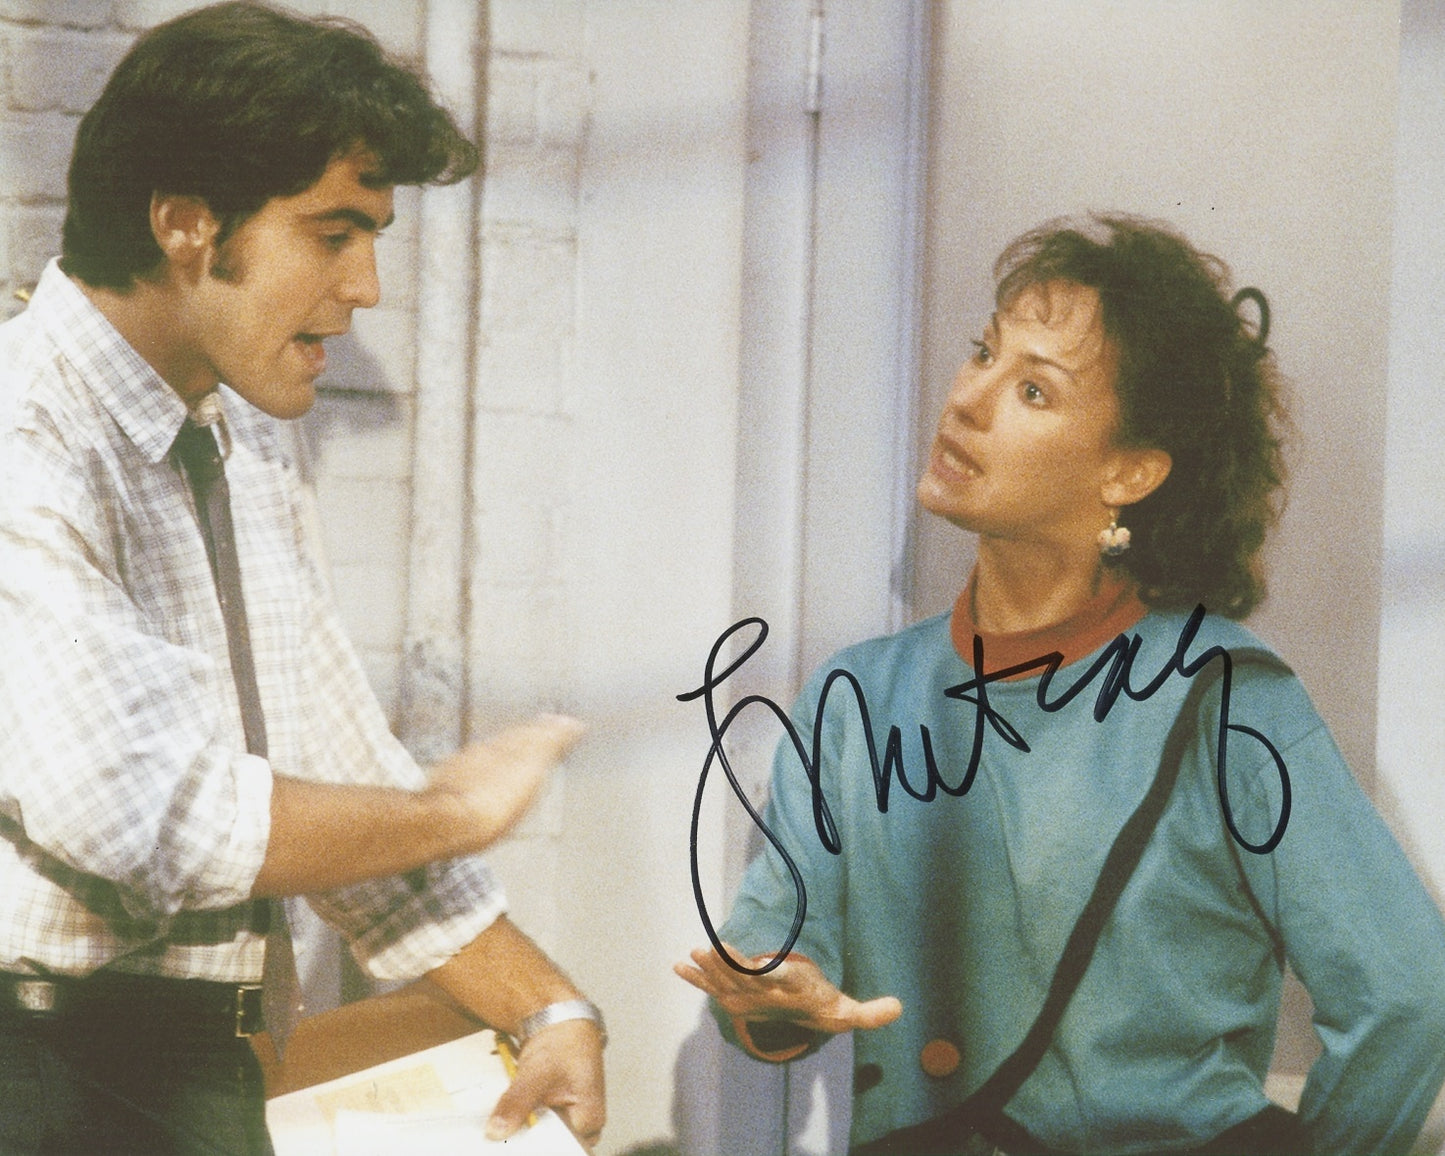 Laurie Metcalf Signed 8x10 Photo - Video Proof